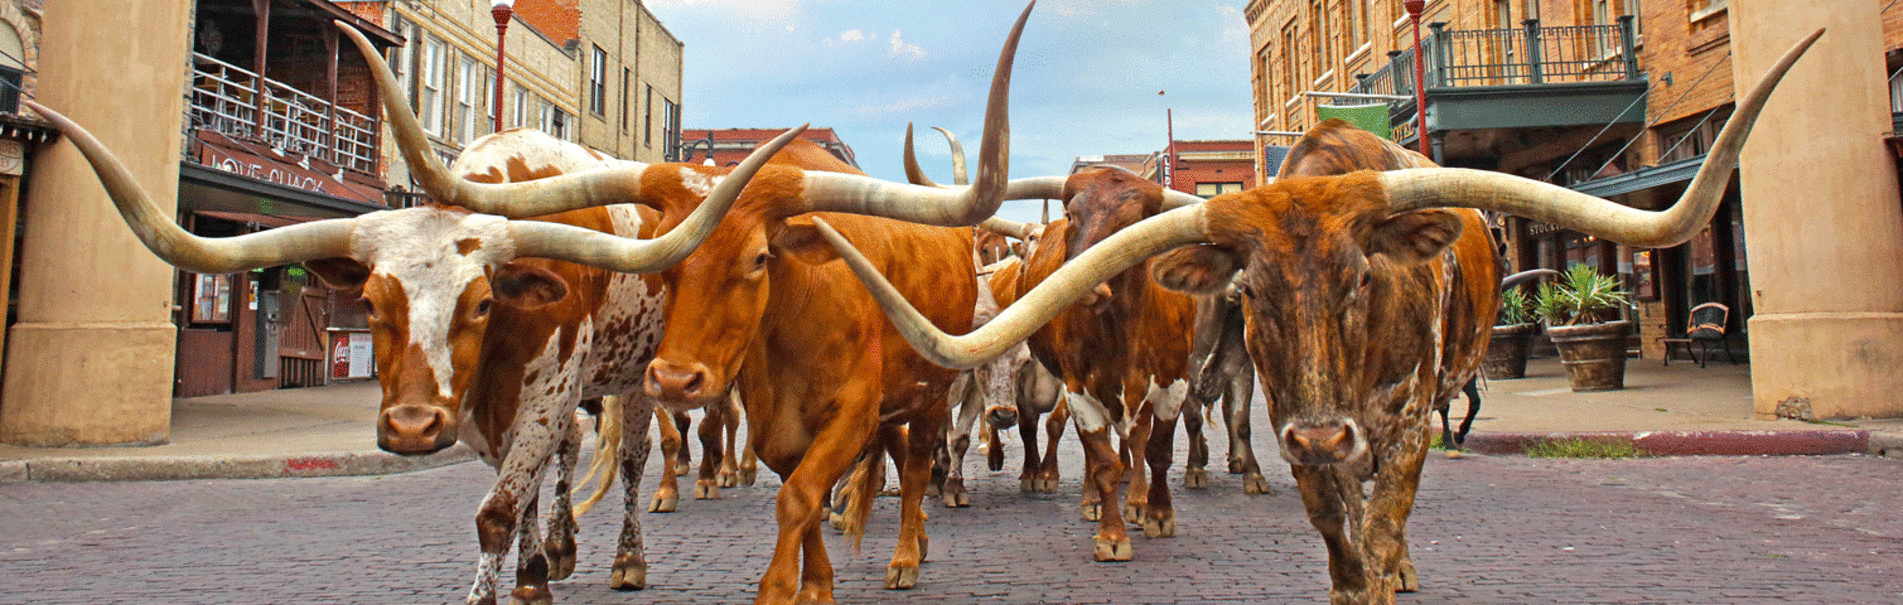 Fort Worth Texas Things To Do - Shopping, Nightlife, Museums